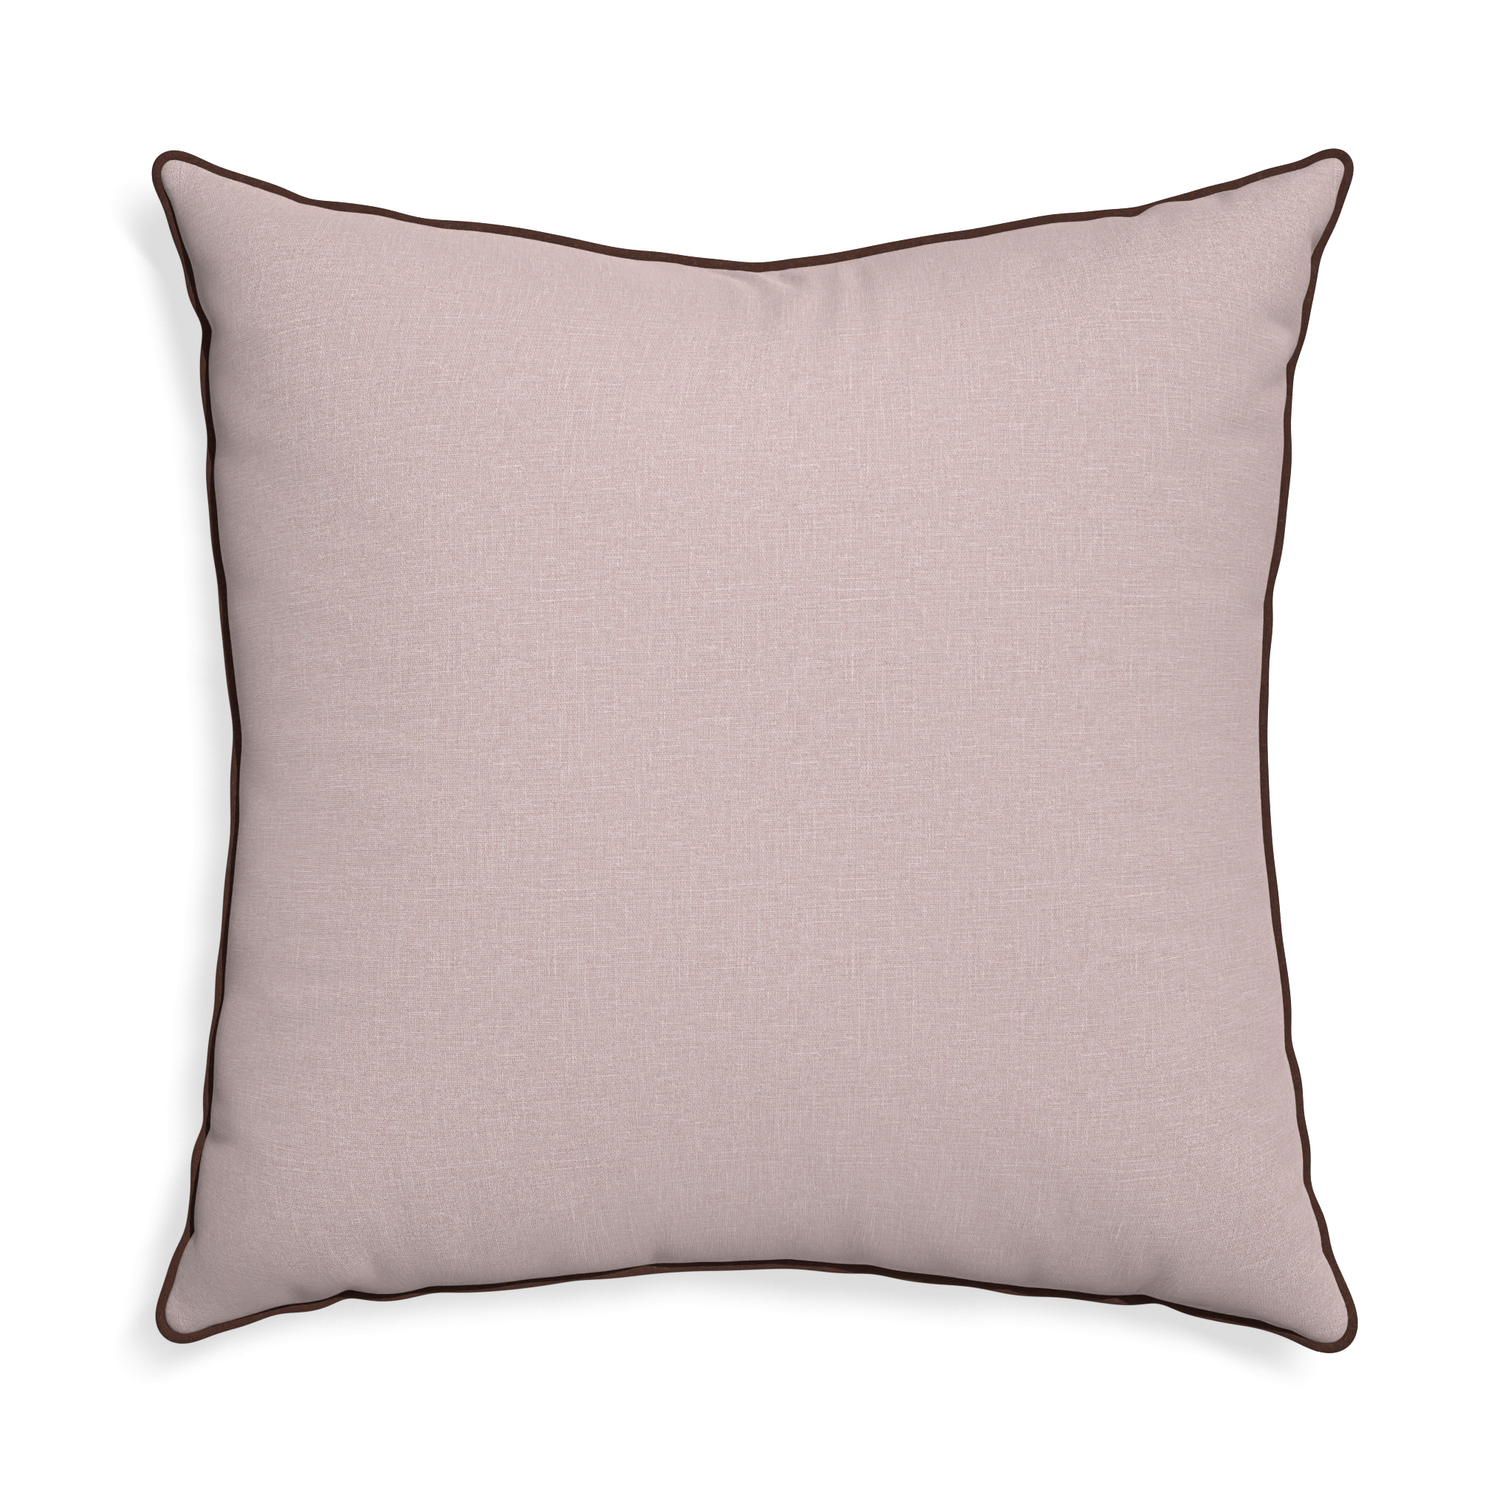 Euro-sham orchid custom mauve pinkpillow with w piping on white background